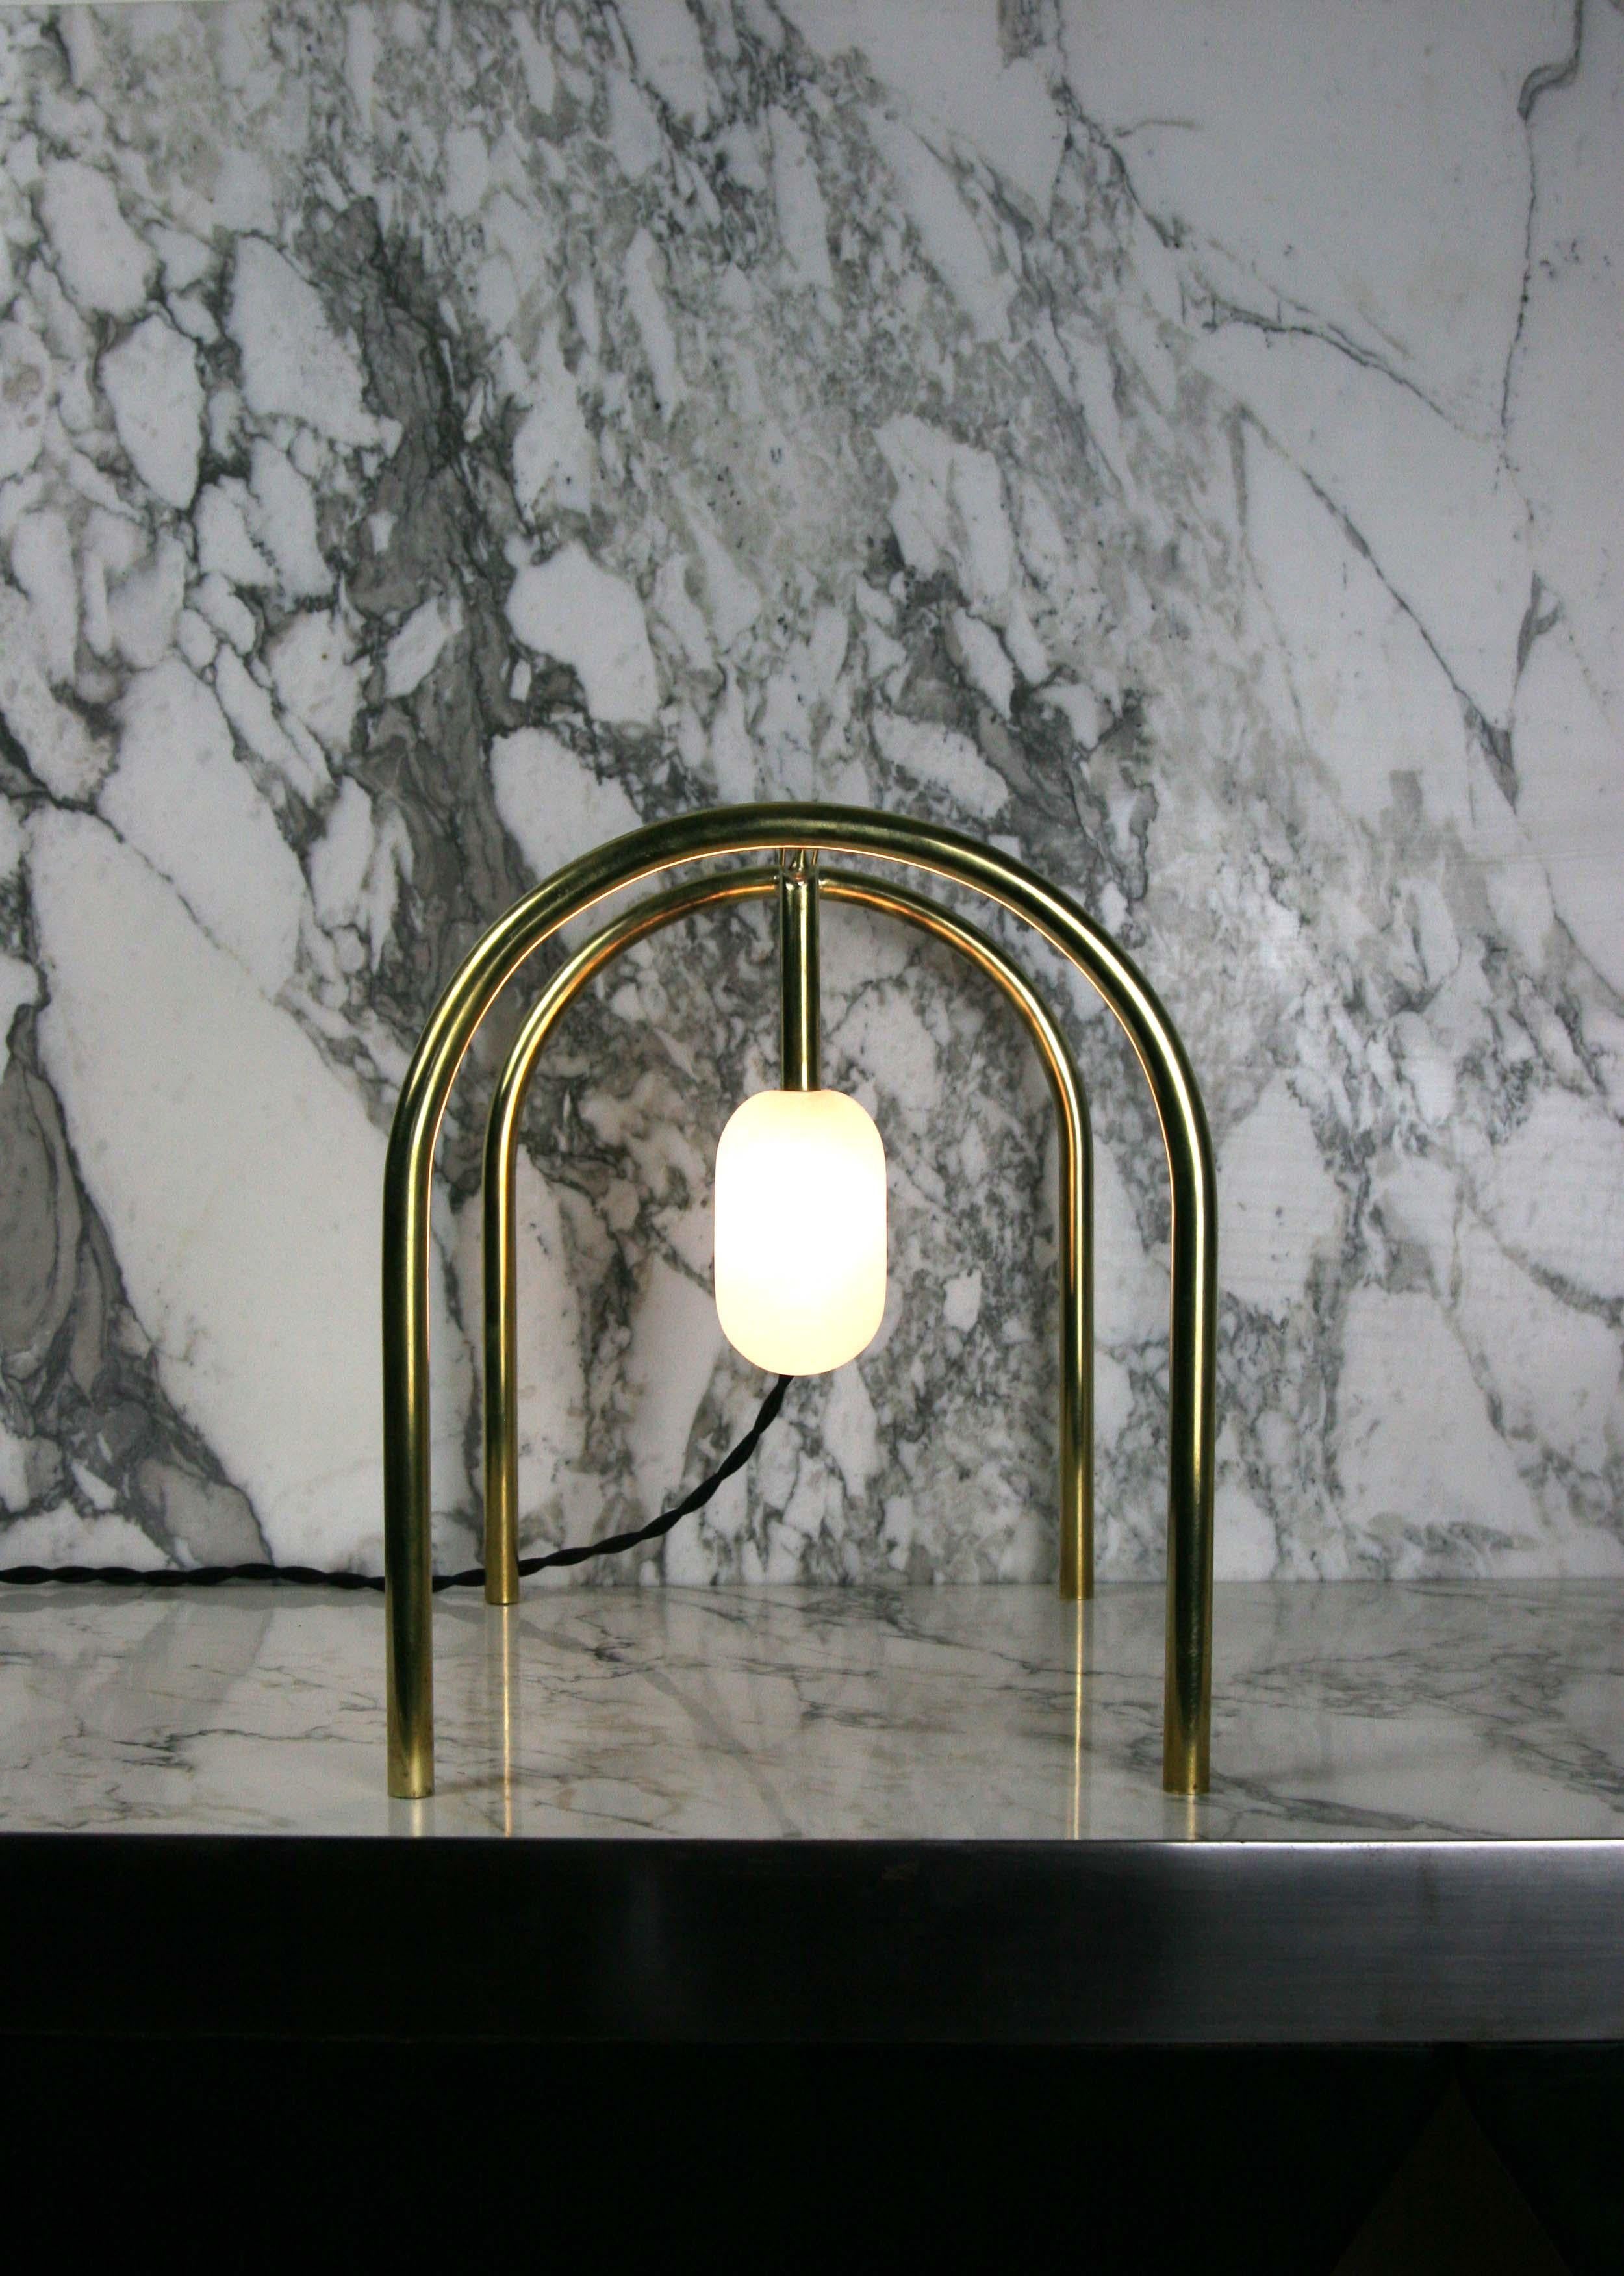 Arch lamp by Krzywda
Dimensions: 30L x 25D x 21H cm
Materials: Alabaster, brass
Versions variable: Tulip, tear, oblong, sphere diffuser.

Individually handmade in France by Krzywda. 

Krzywda (pronounce 